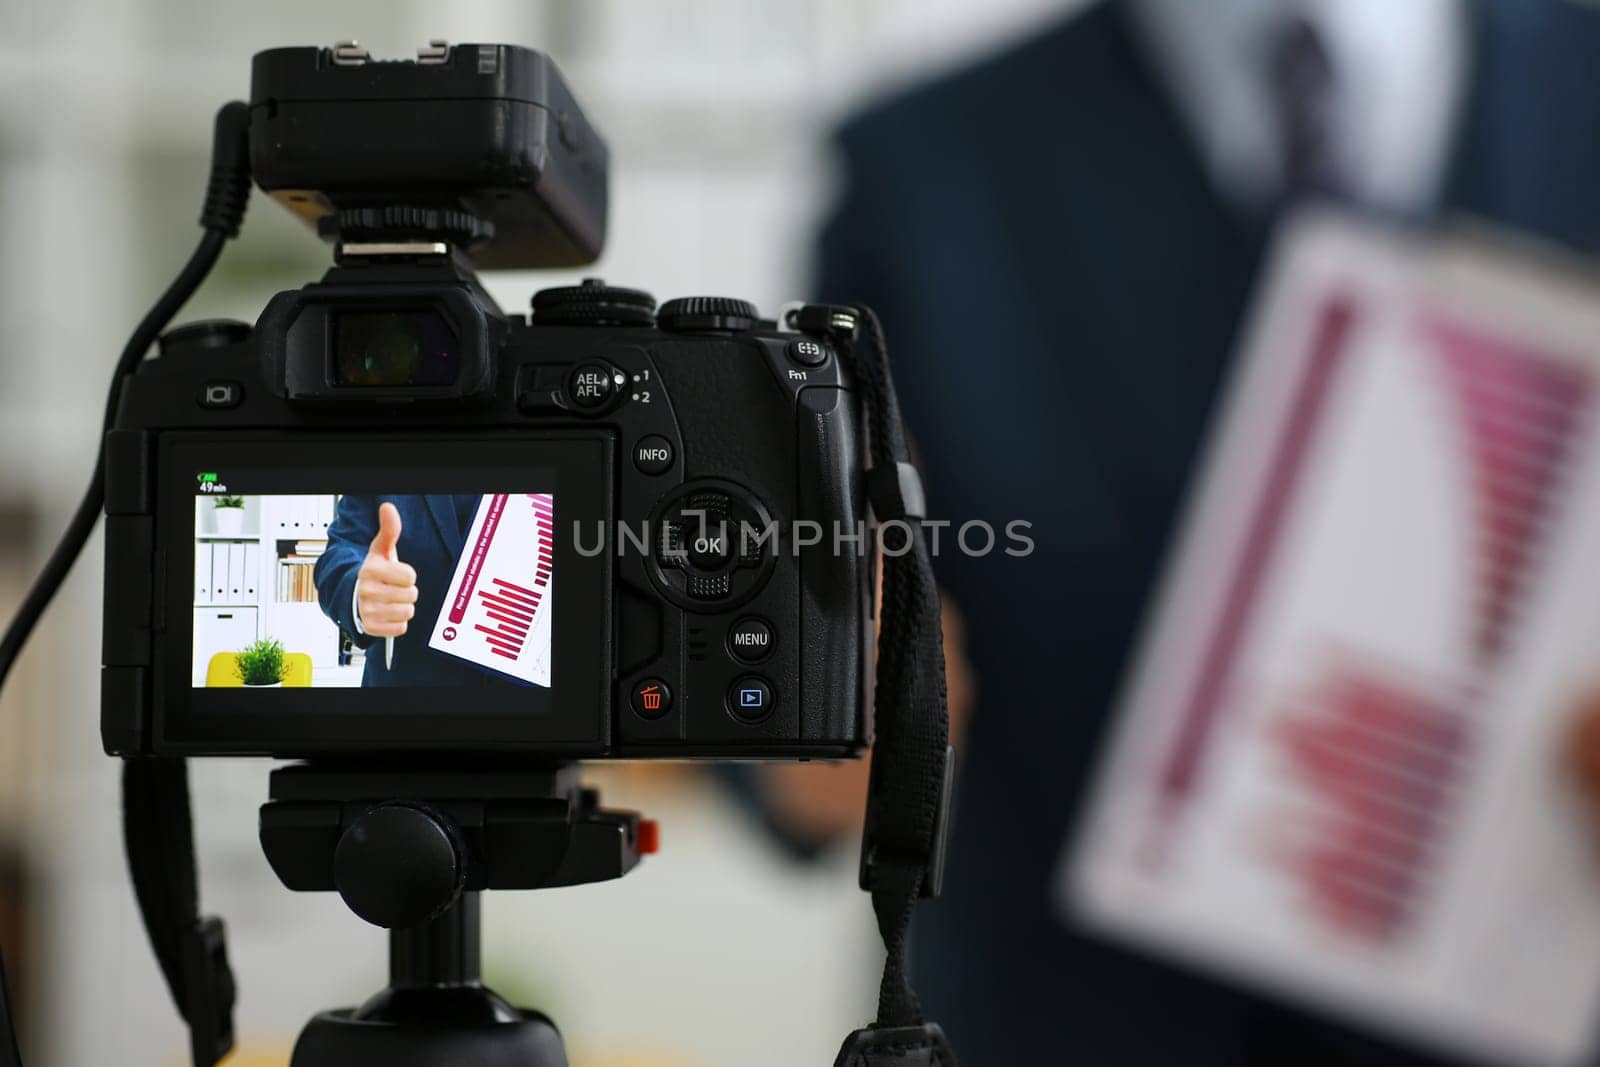 Male in suit and tie show stats graph pad making promo videoblog or photo session in office camcorder to tripod closeup. Vlogger selfie sale solution or finance advisor management information